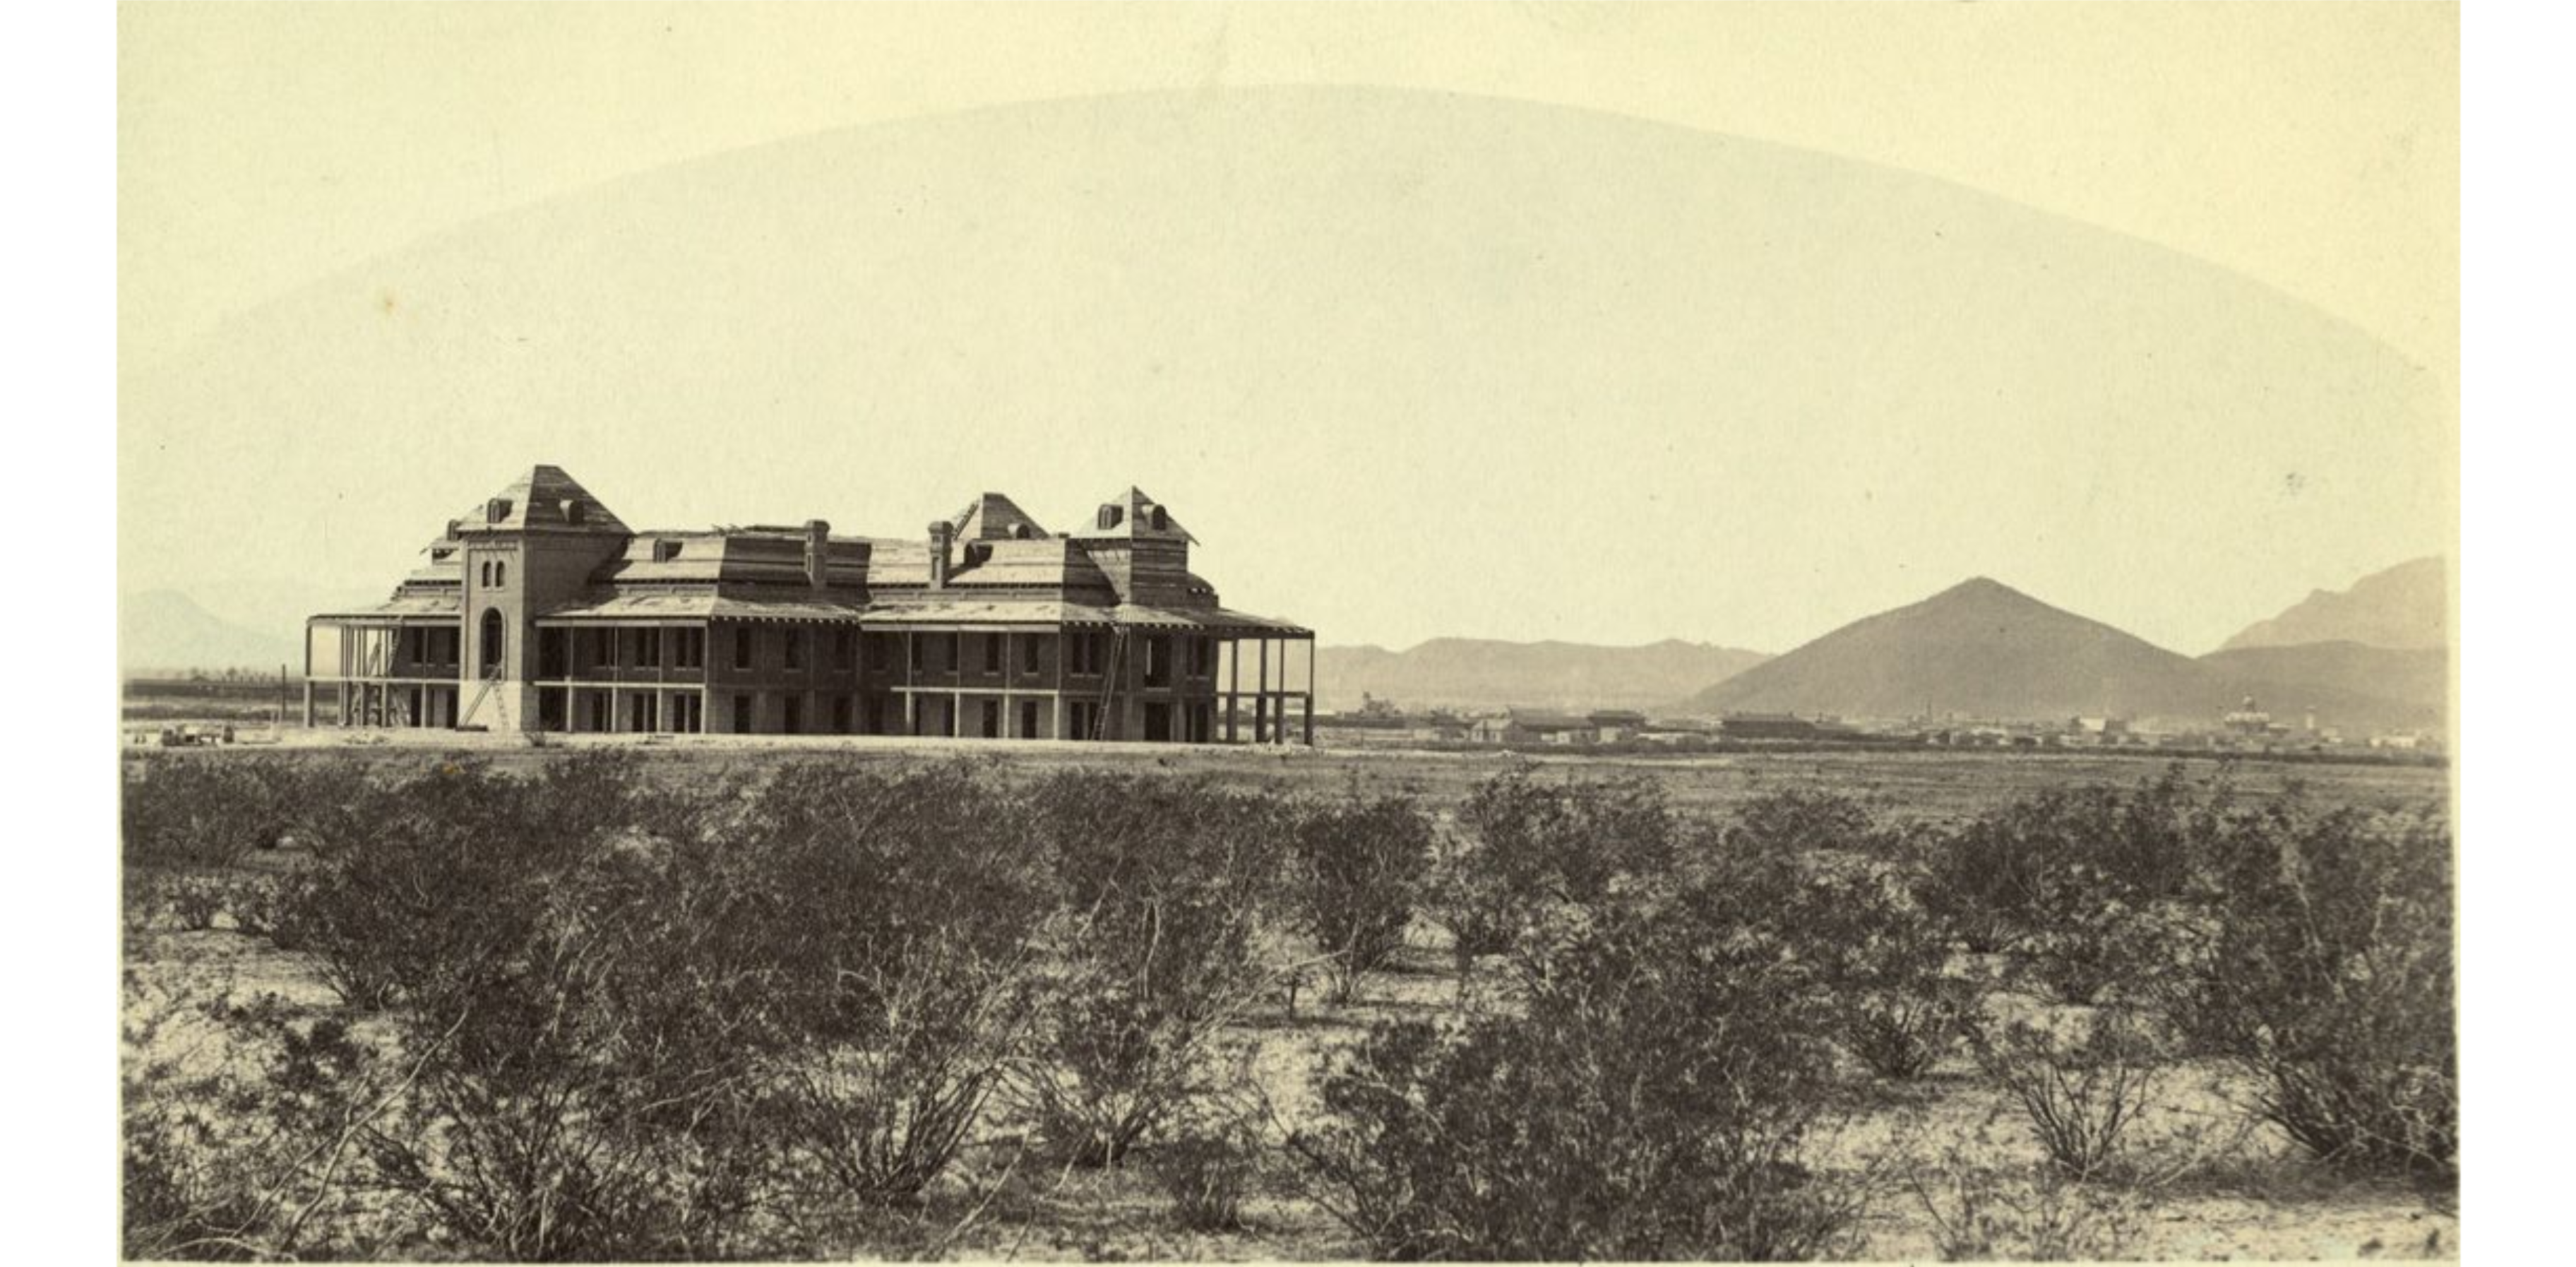 The 1st building at the University of Arizona (Old Main) being constructed in the middle of the desert. The city of Tucson is in the background. The photo is Looking west.